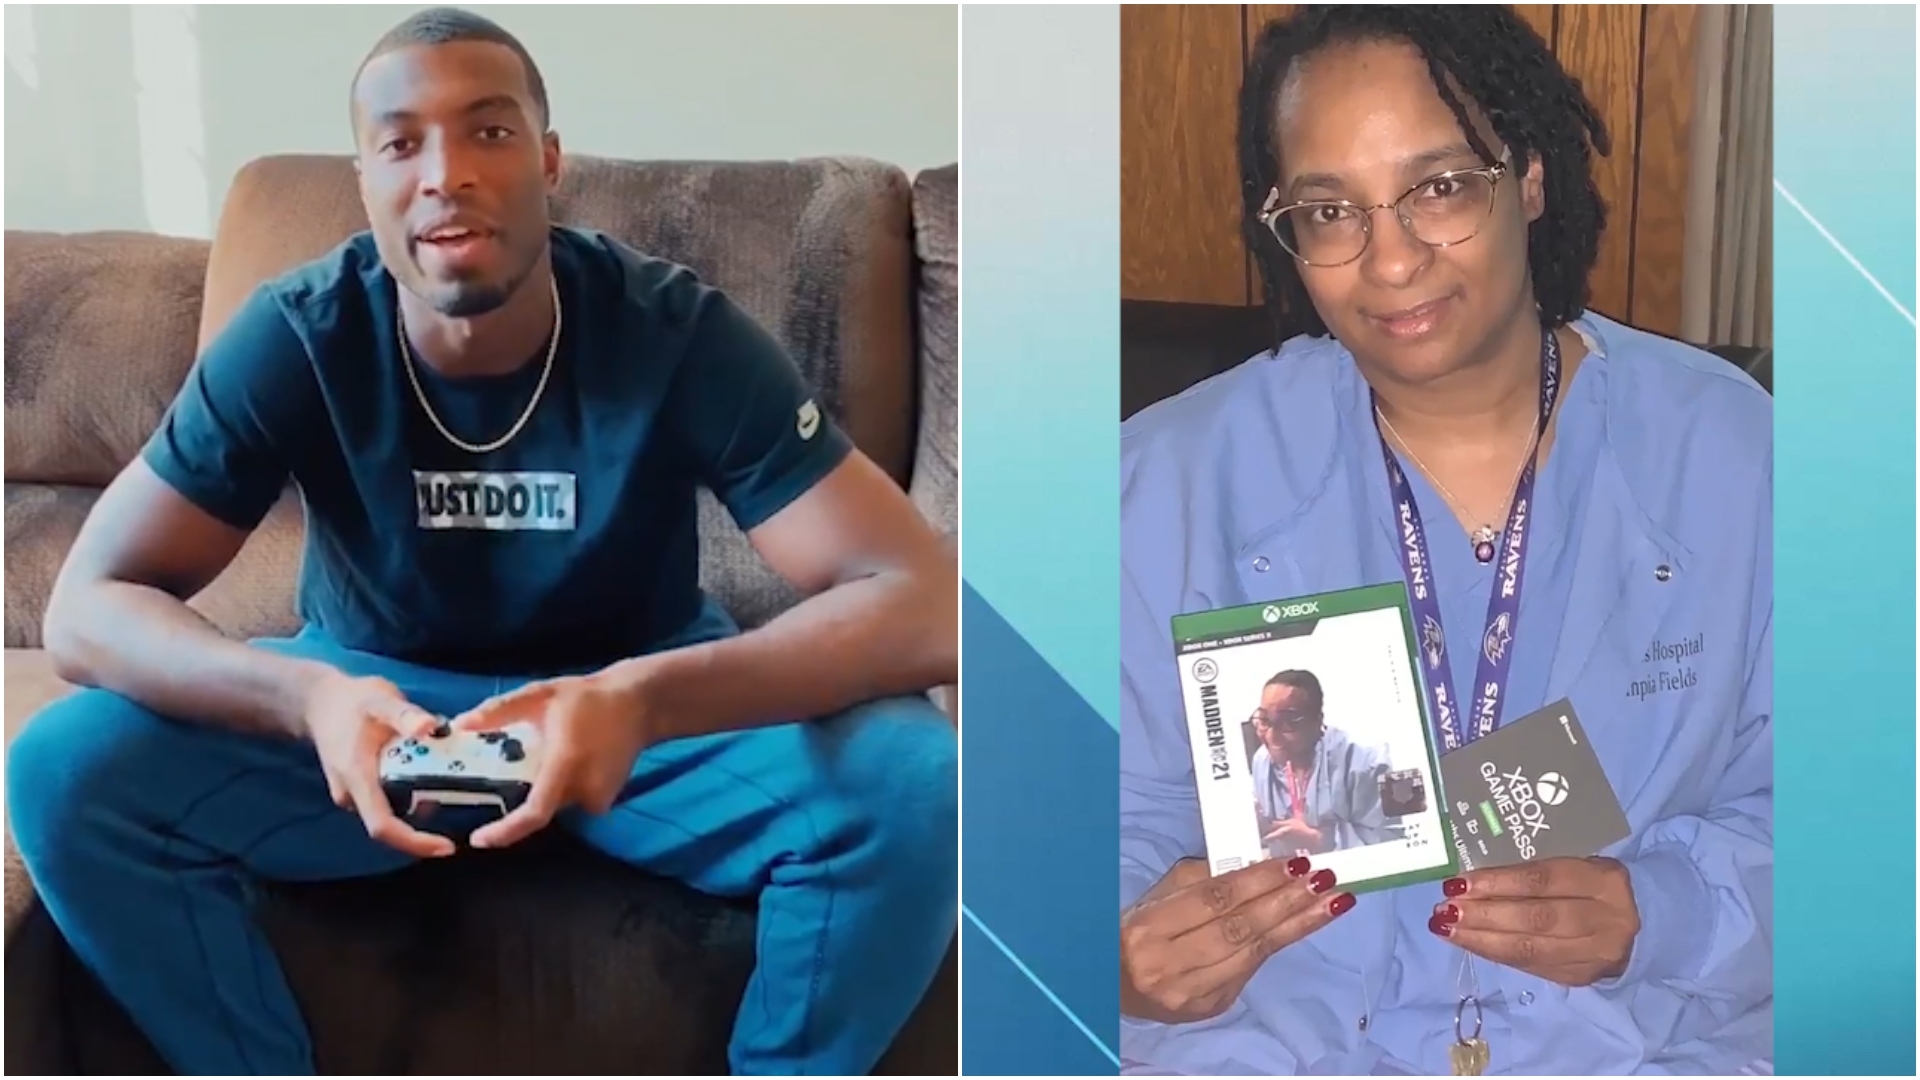 Boykin surprises mom with Madden cover